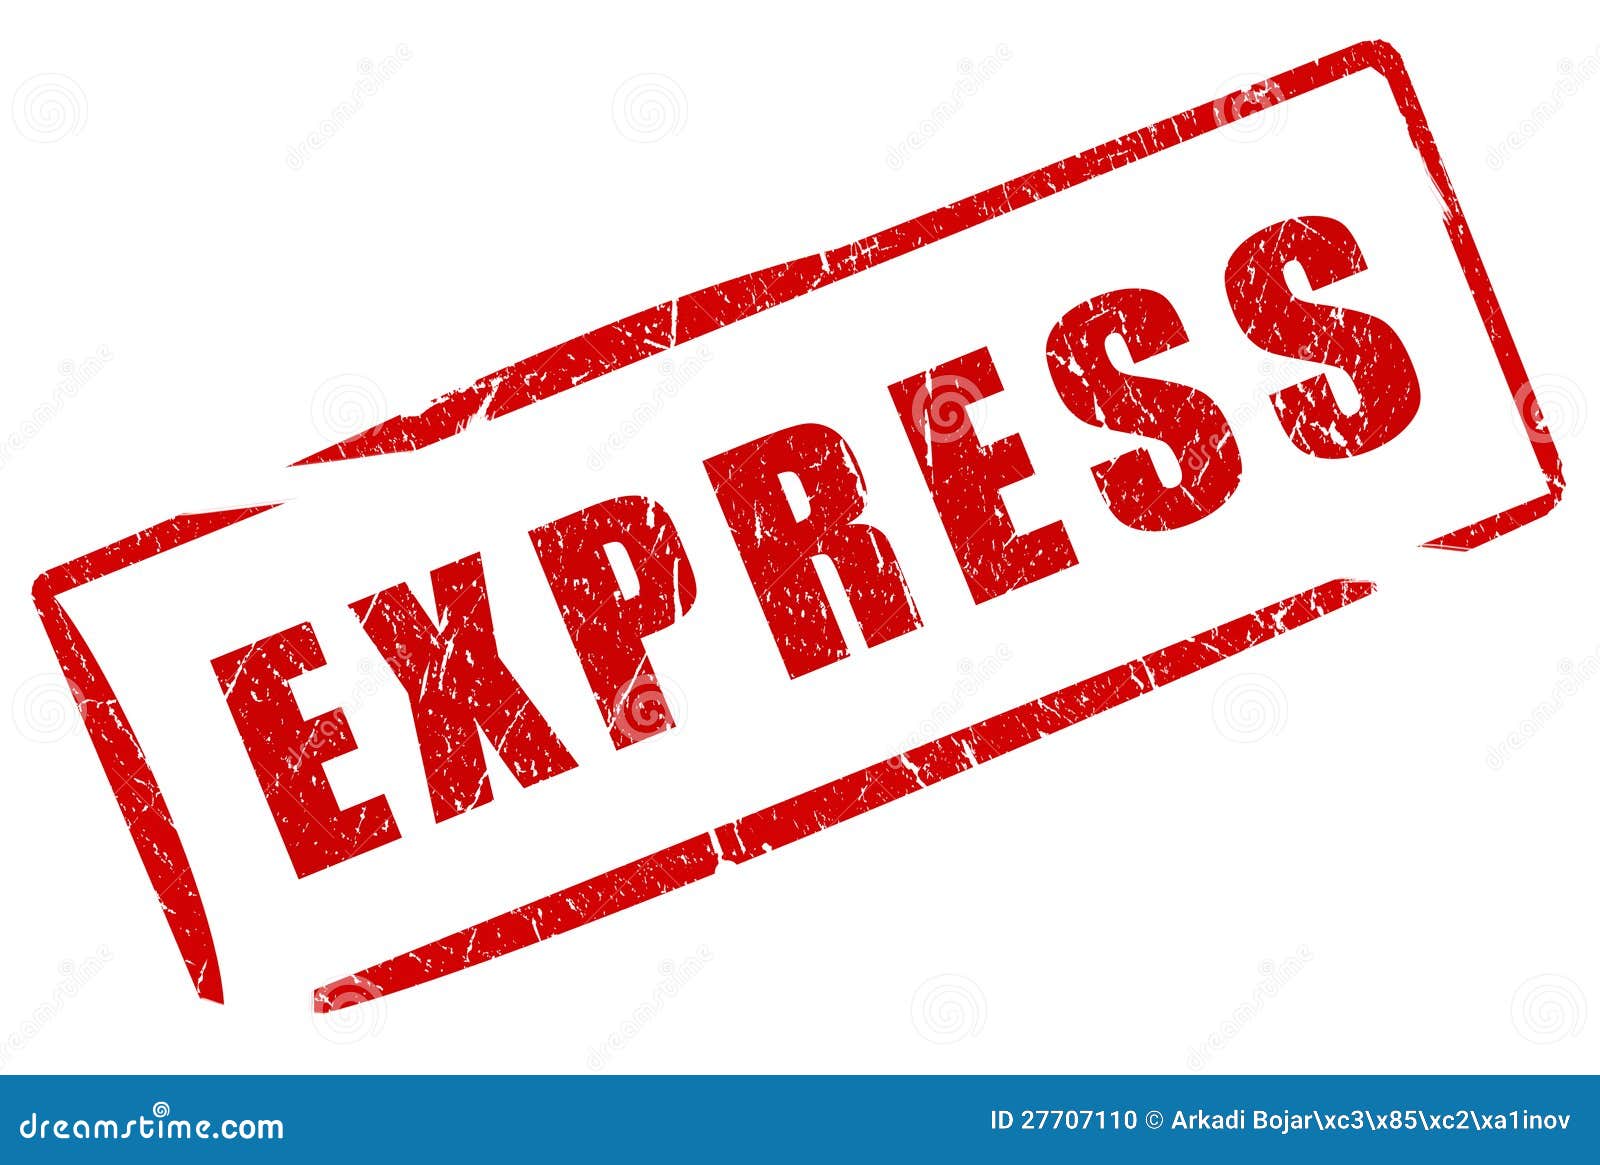 express delivery clipart - photo #29